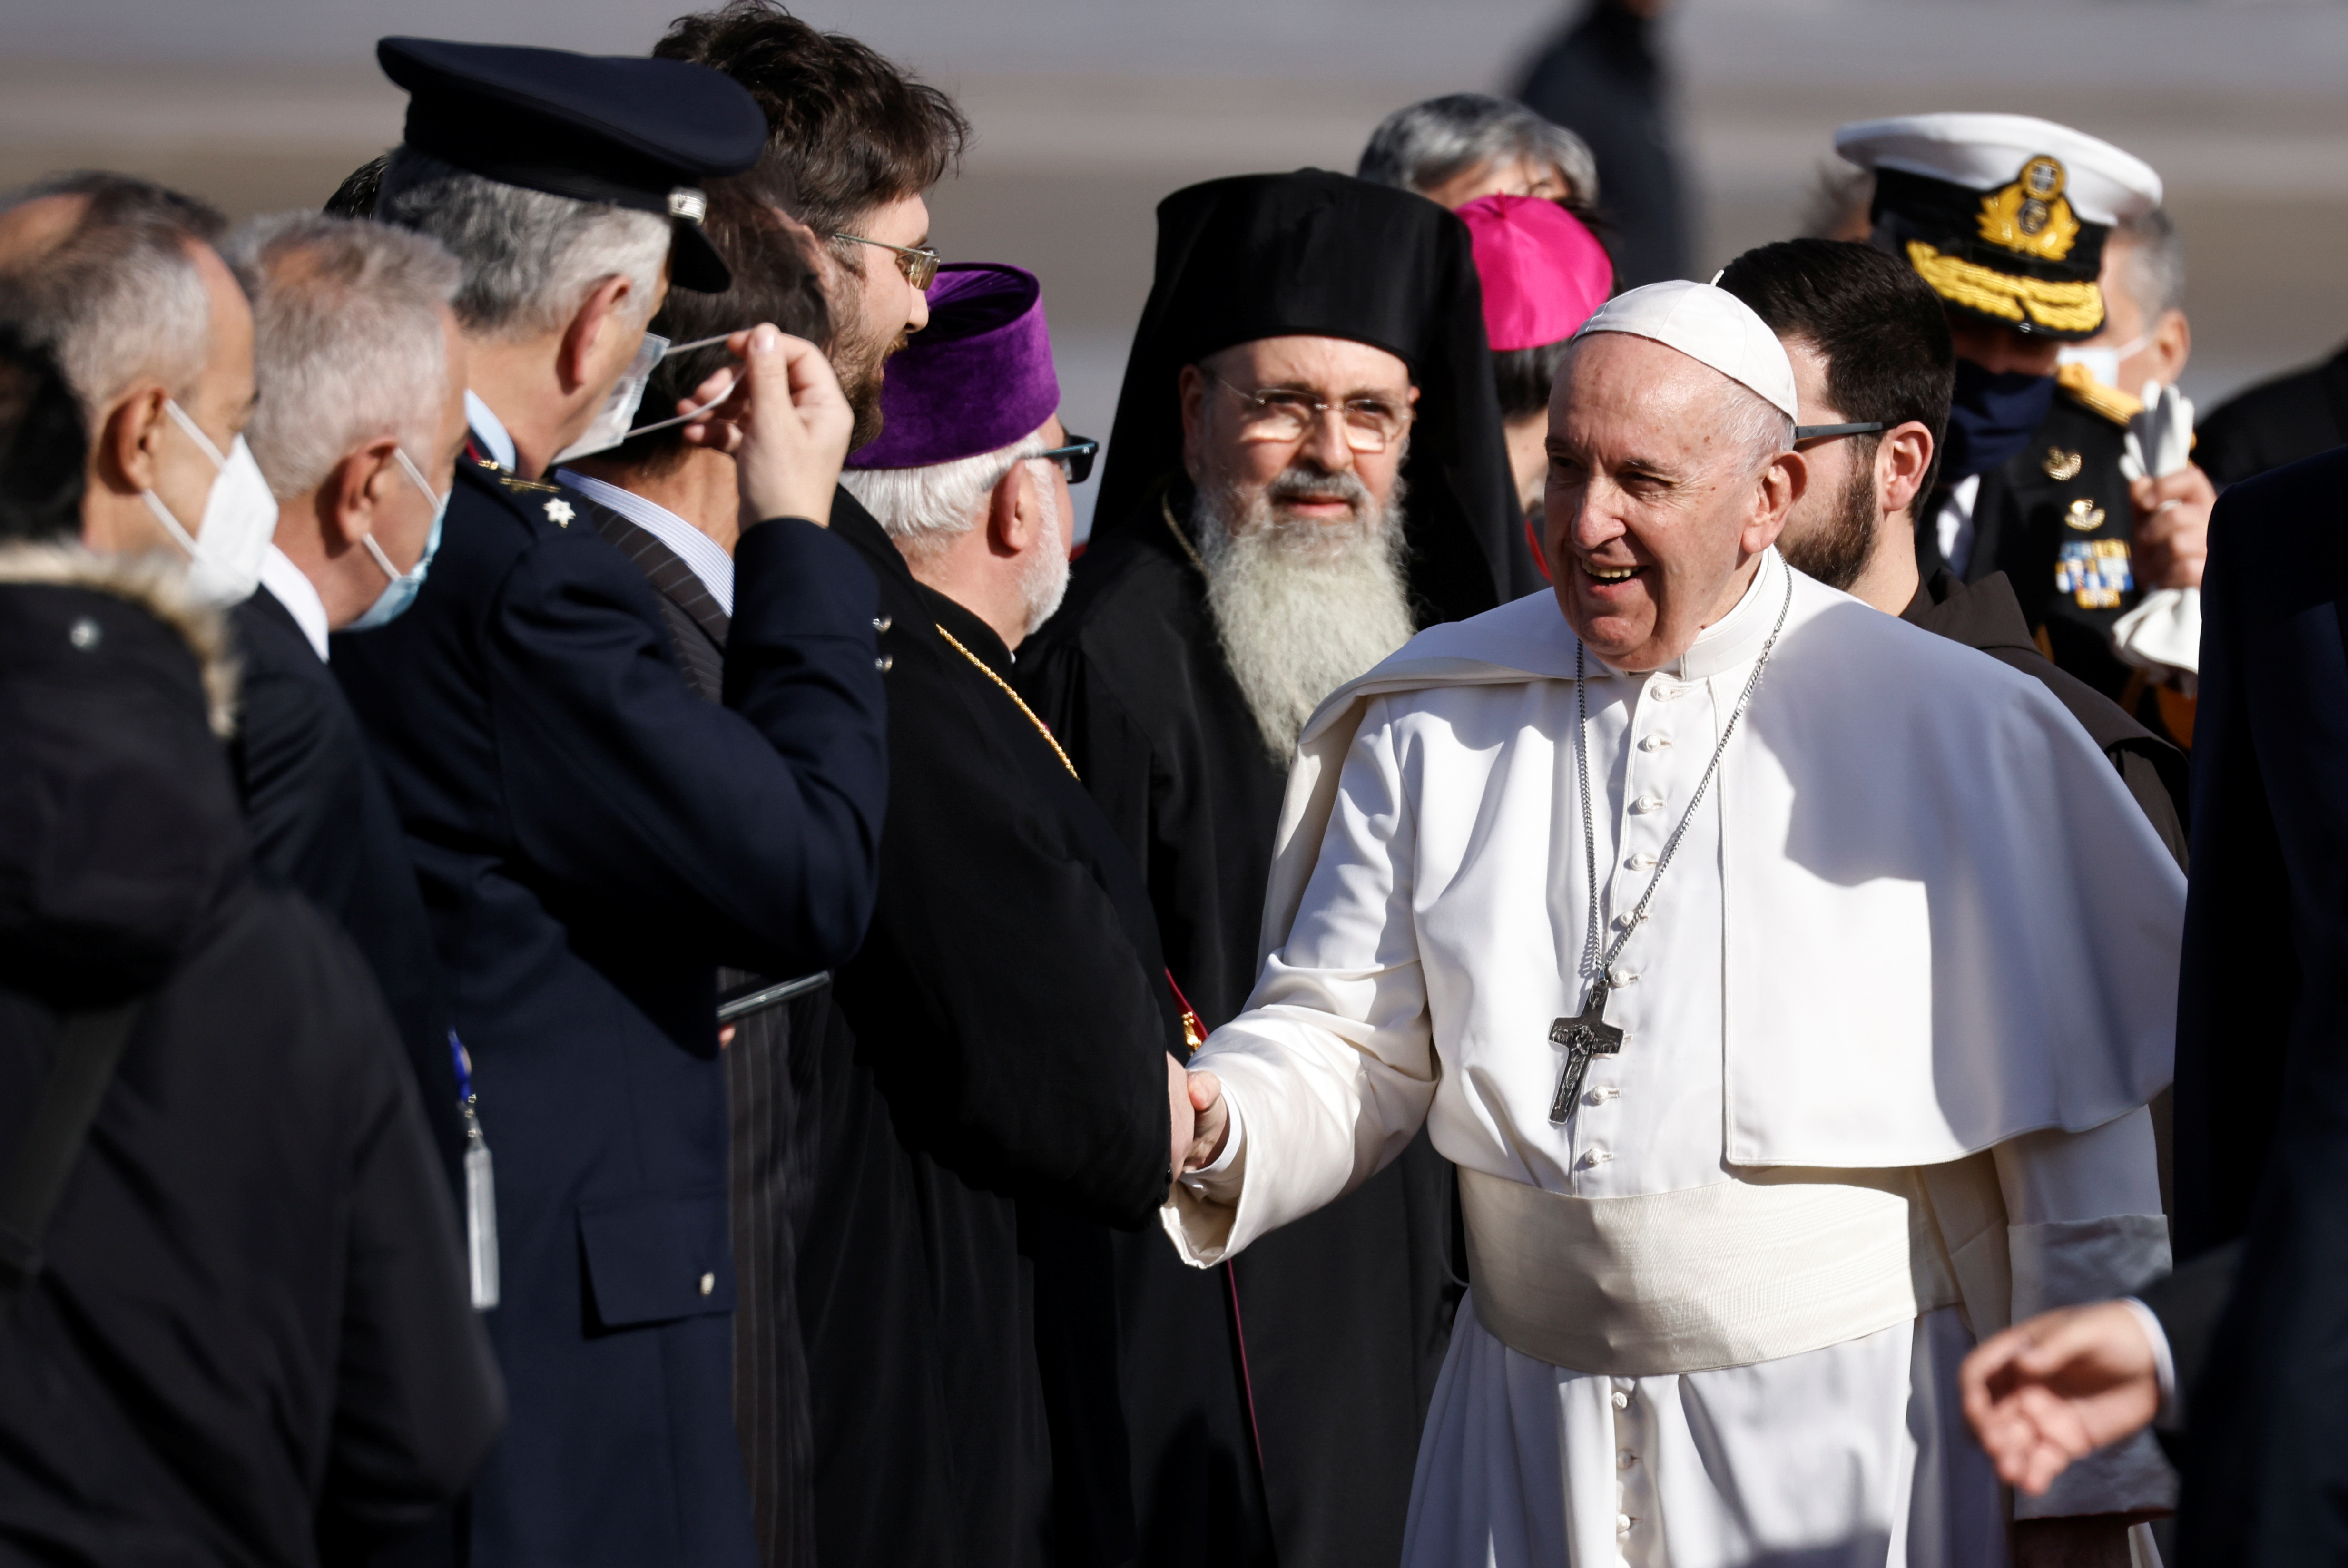 Pope Francis greets people as he arrives at Athens International Airport in Athens, Greece, December 4, 2021. REUTERS/Alkis Konstantinidis